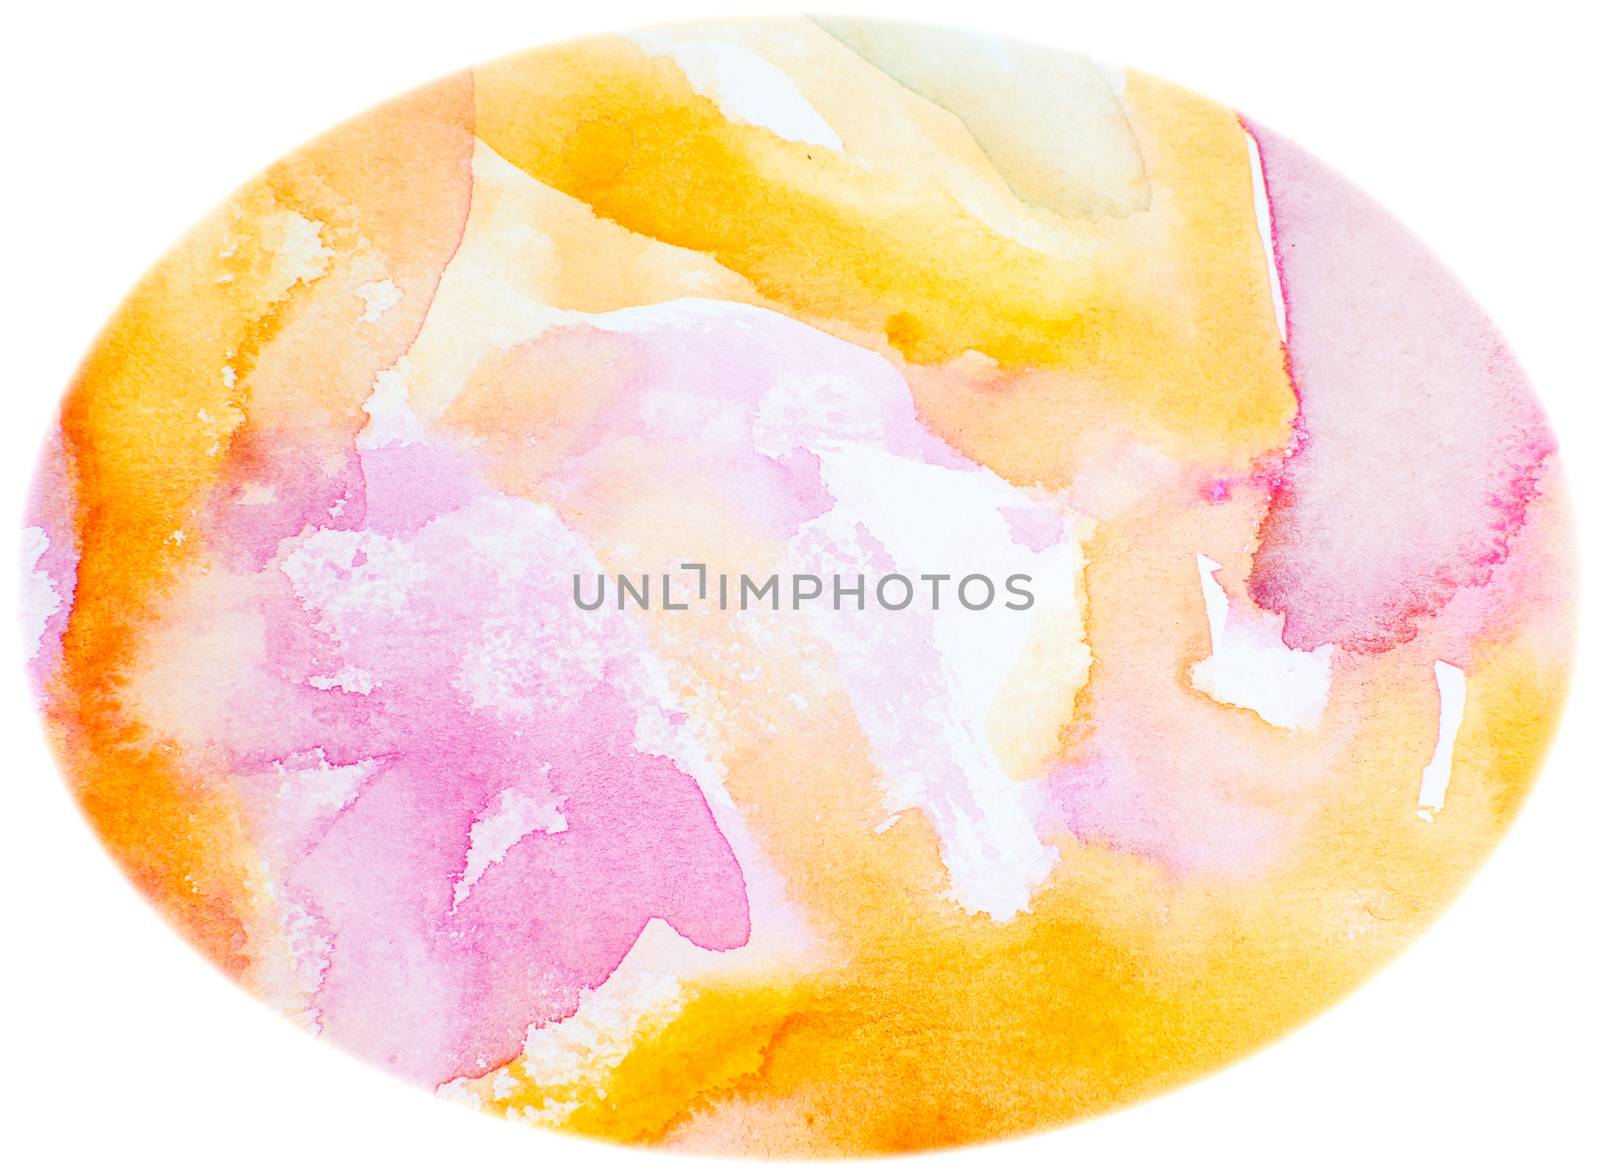 Watercolor egg background yellow pink white. Abstract textured egg-shaped watercolor background.